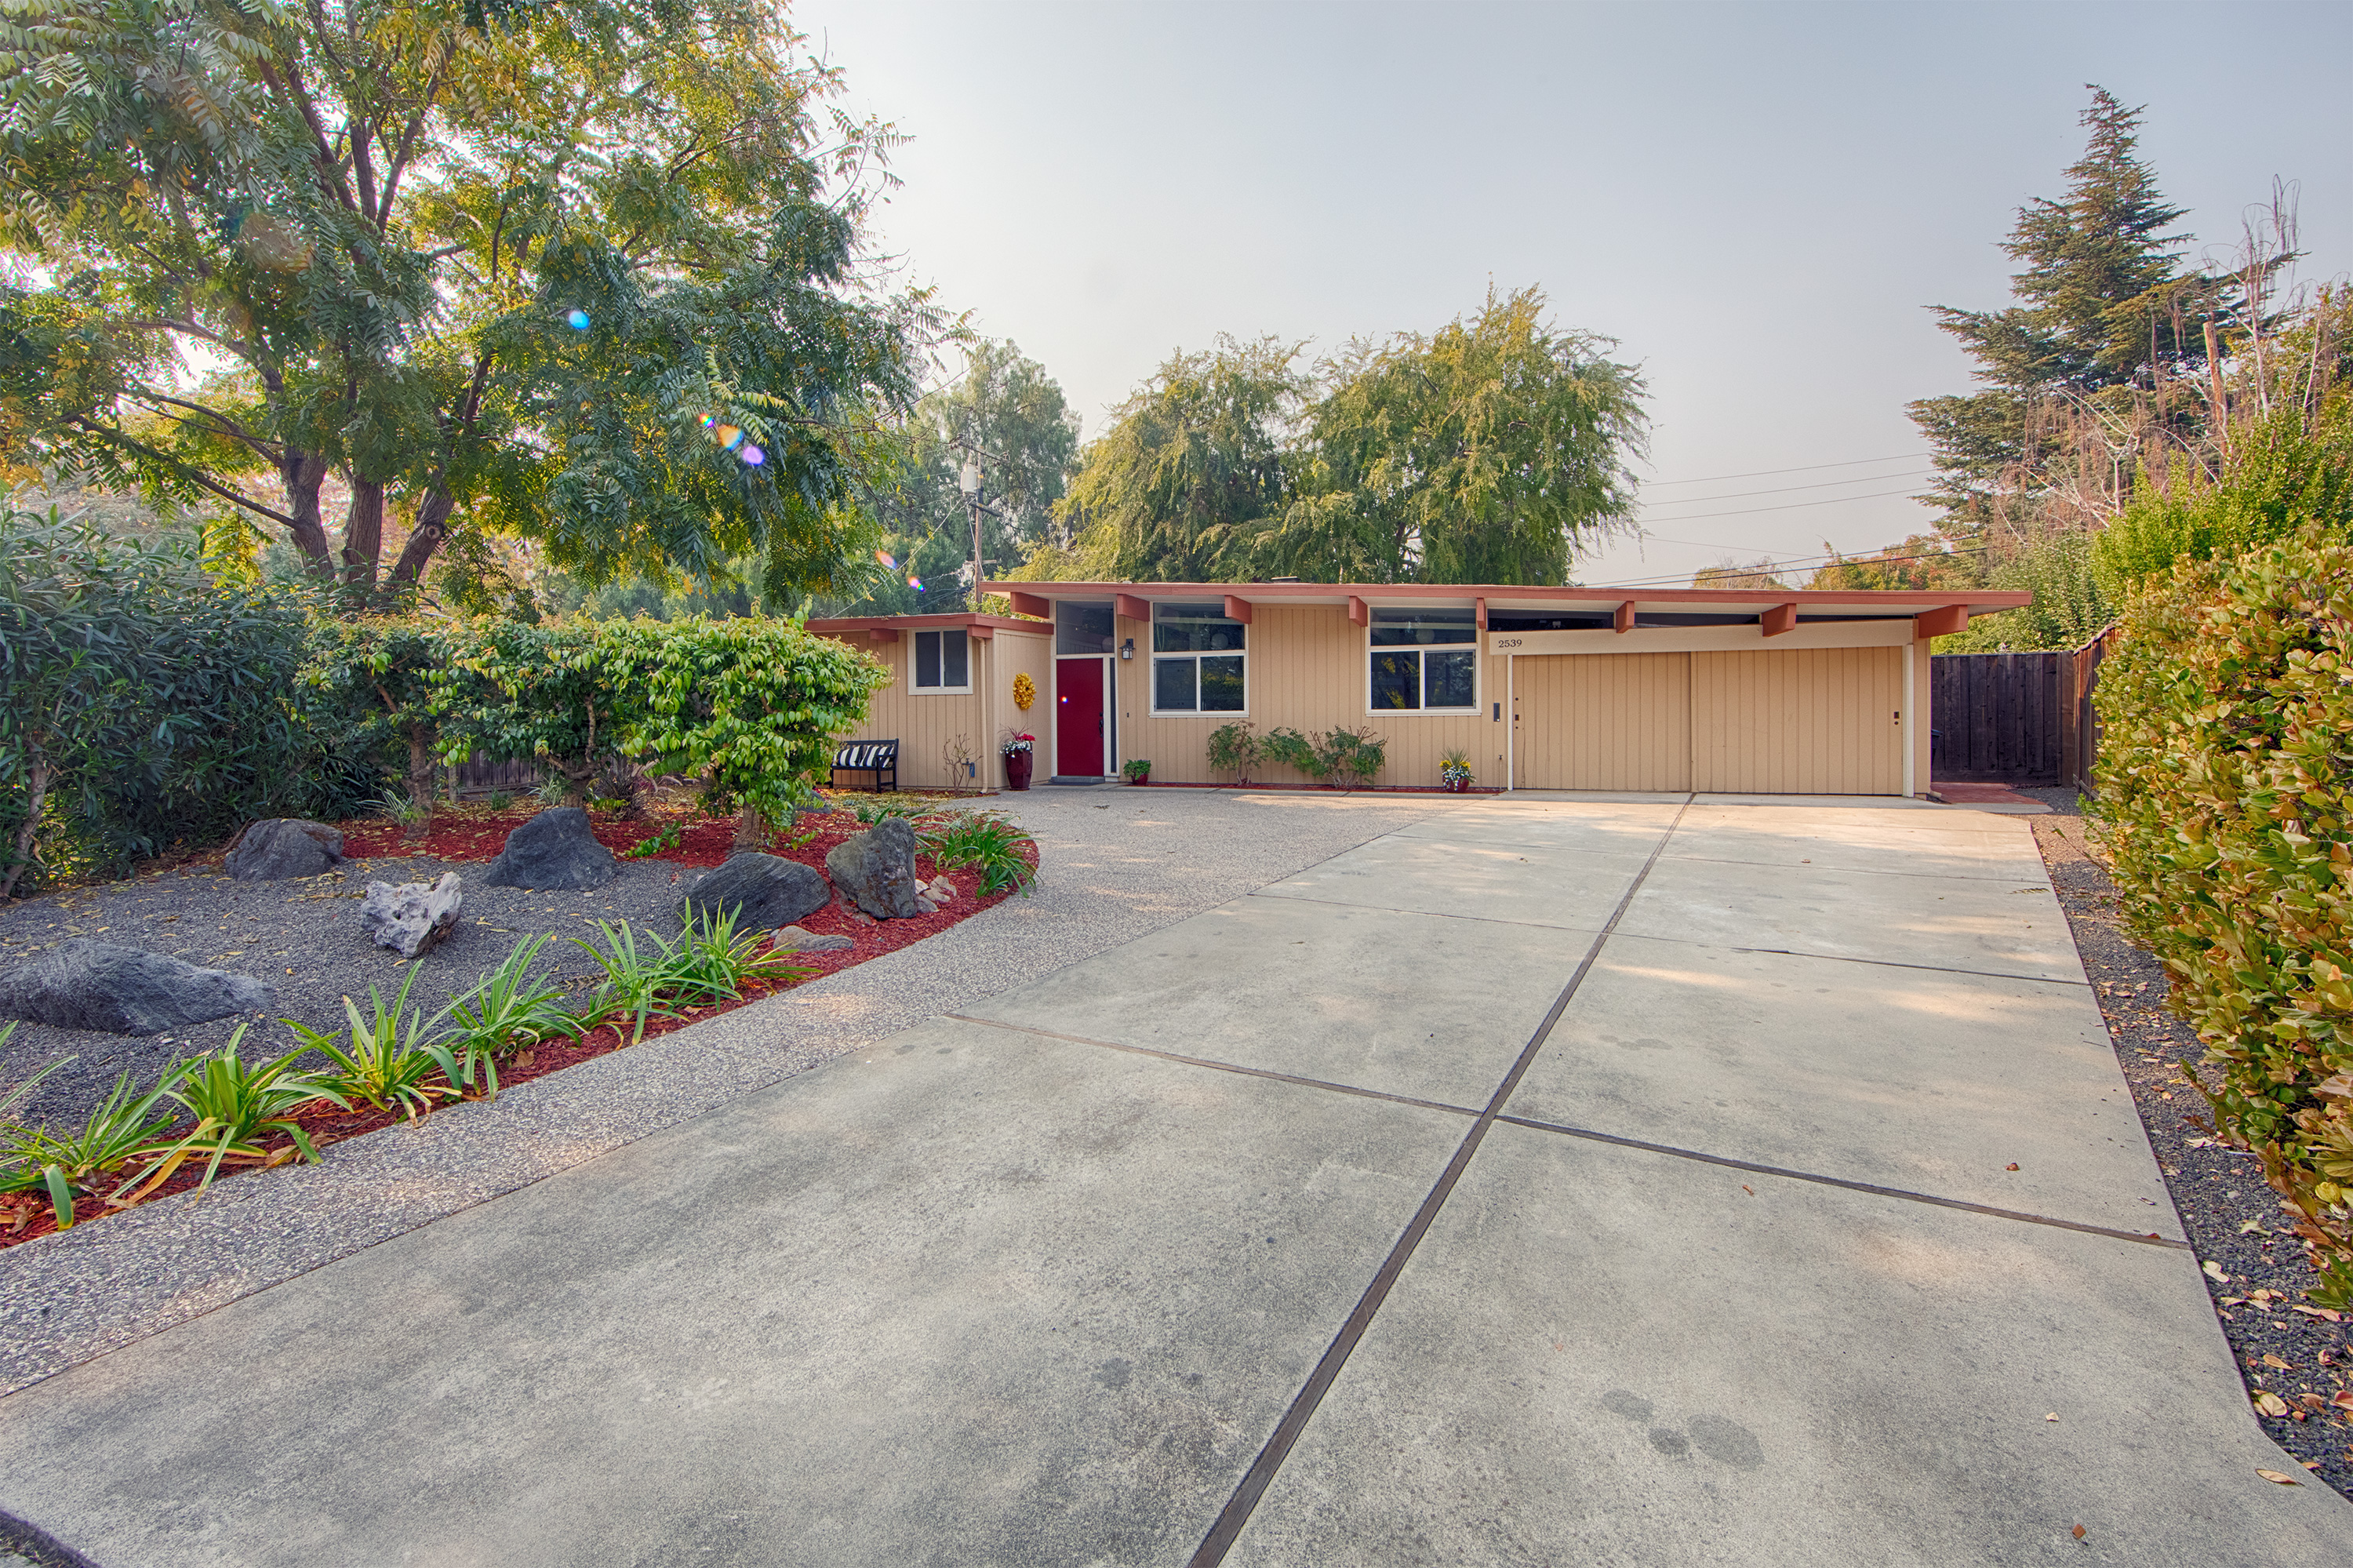 2539 Claire Ct, Mountain View 94043 - Claire Ct 2539 